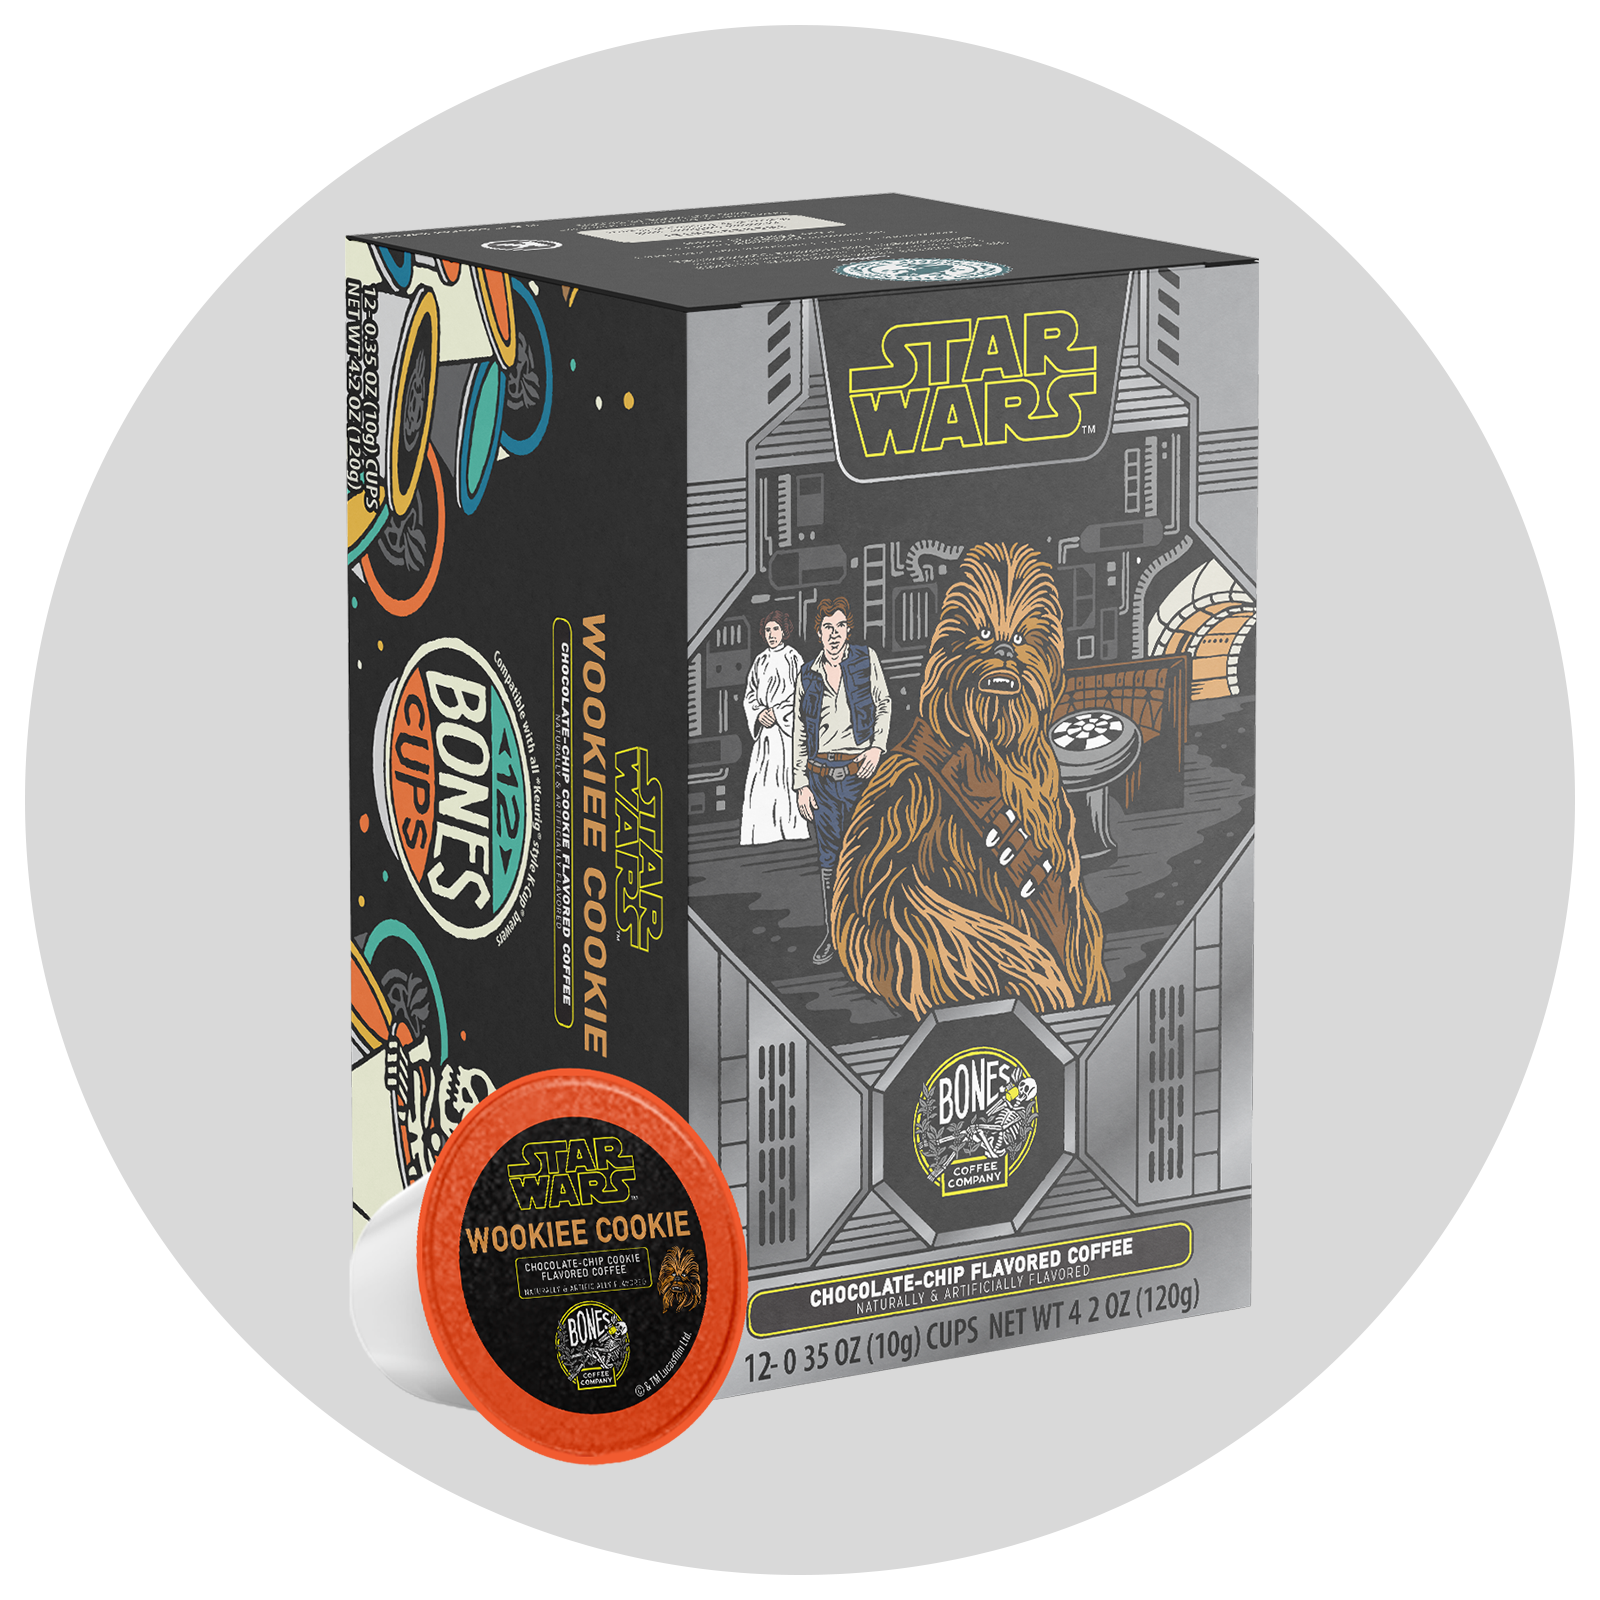 The front of the Bones Coffee Company Wookiee Cookie 12 Count Bones Cups box. Its flavor is chocolate chip cookie, and its art shows Chewy, Han Solo, and Leia on it. Behind it is a gray circle.